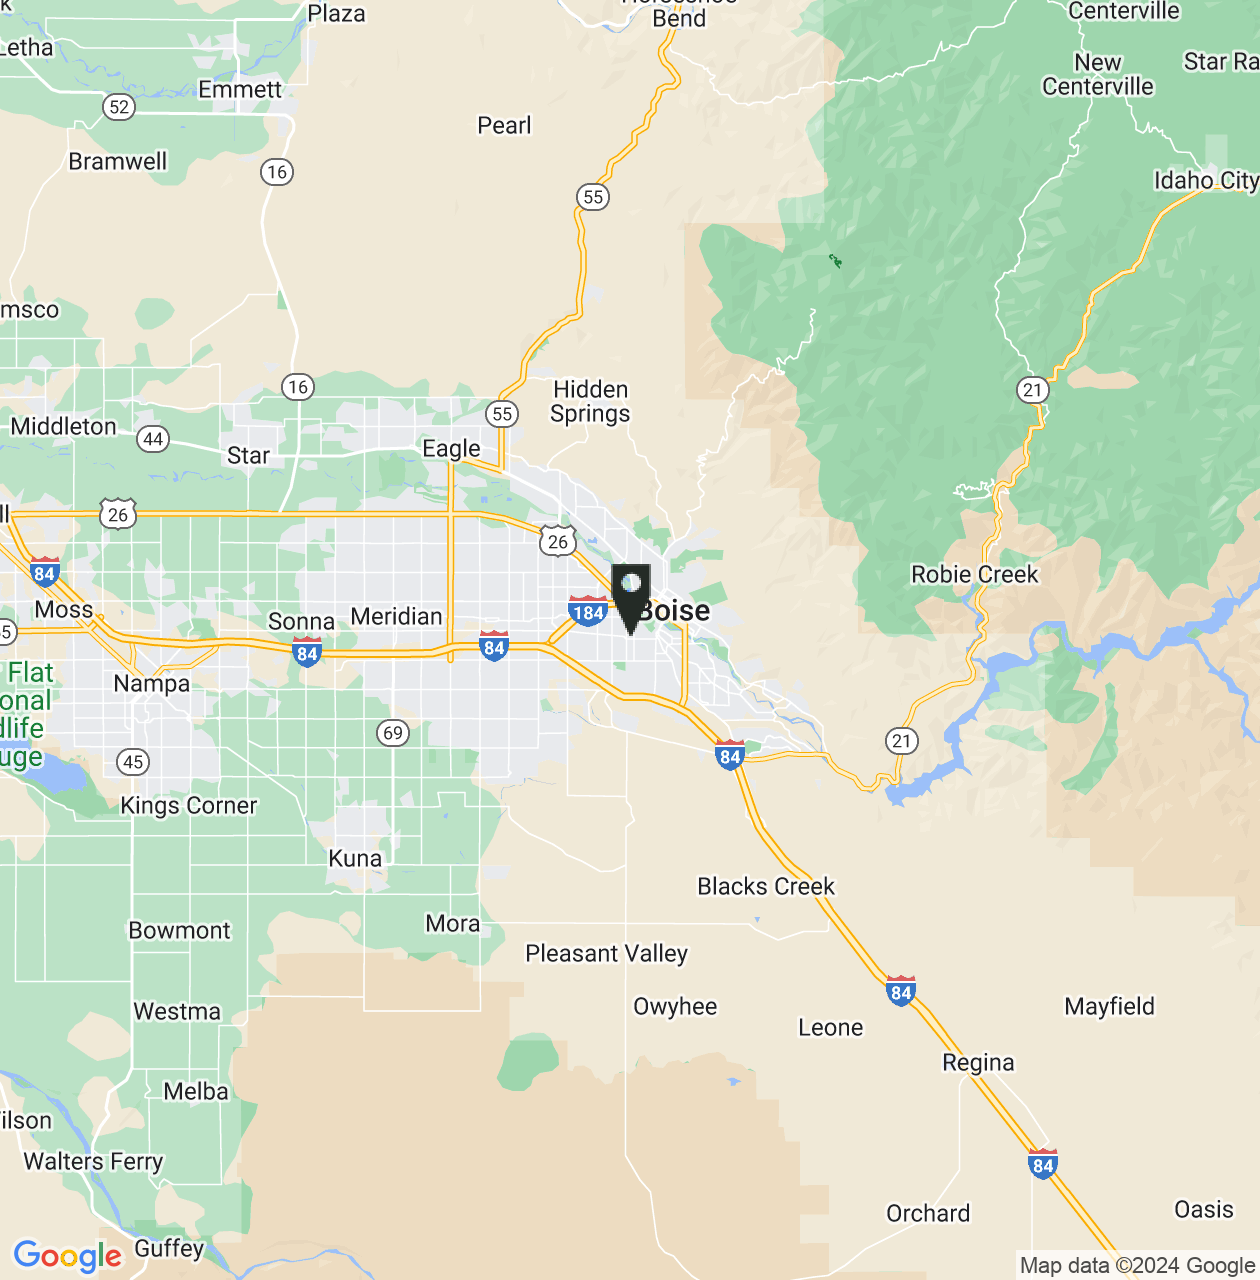 Map showing Boise